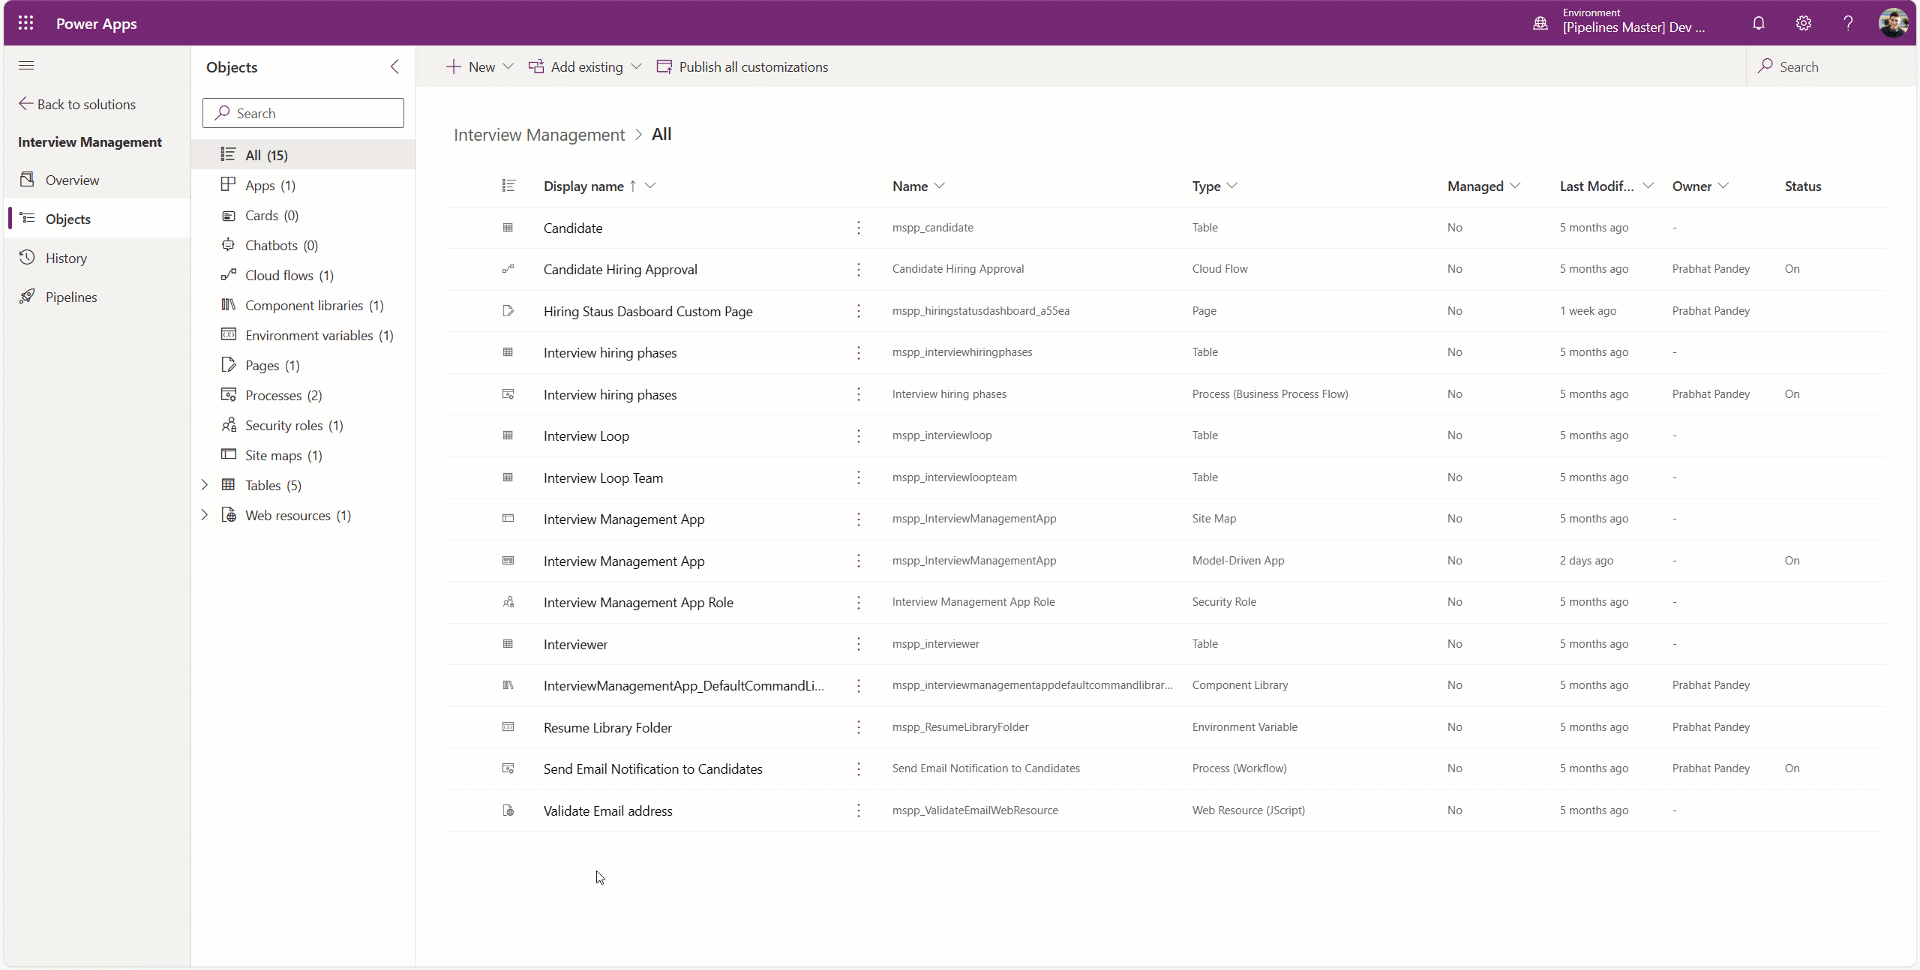 New pipelines Copilot experience, where there is a new generating animation, and the deployment notes pre-fill in one box rather than a separate field.